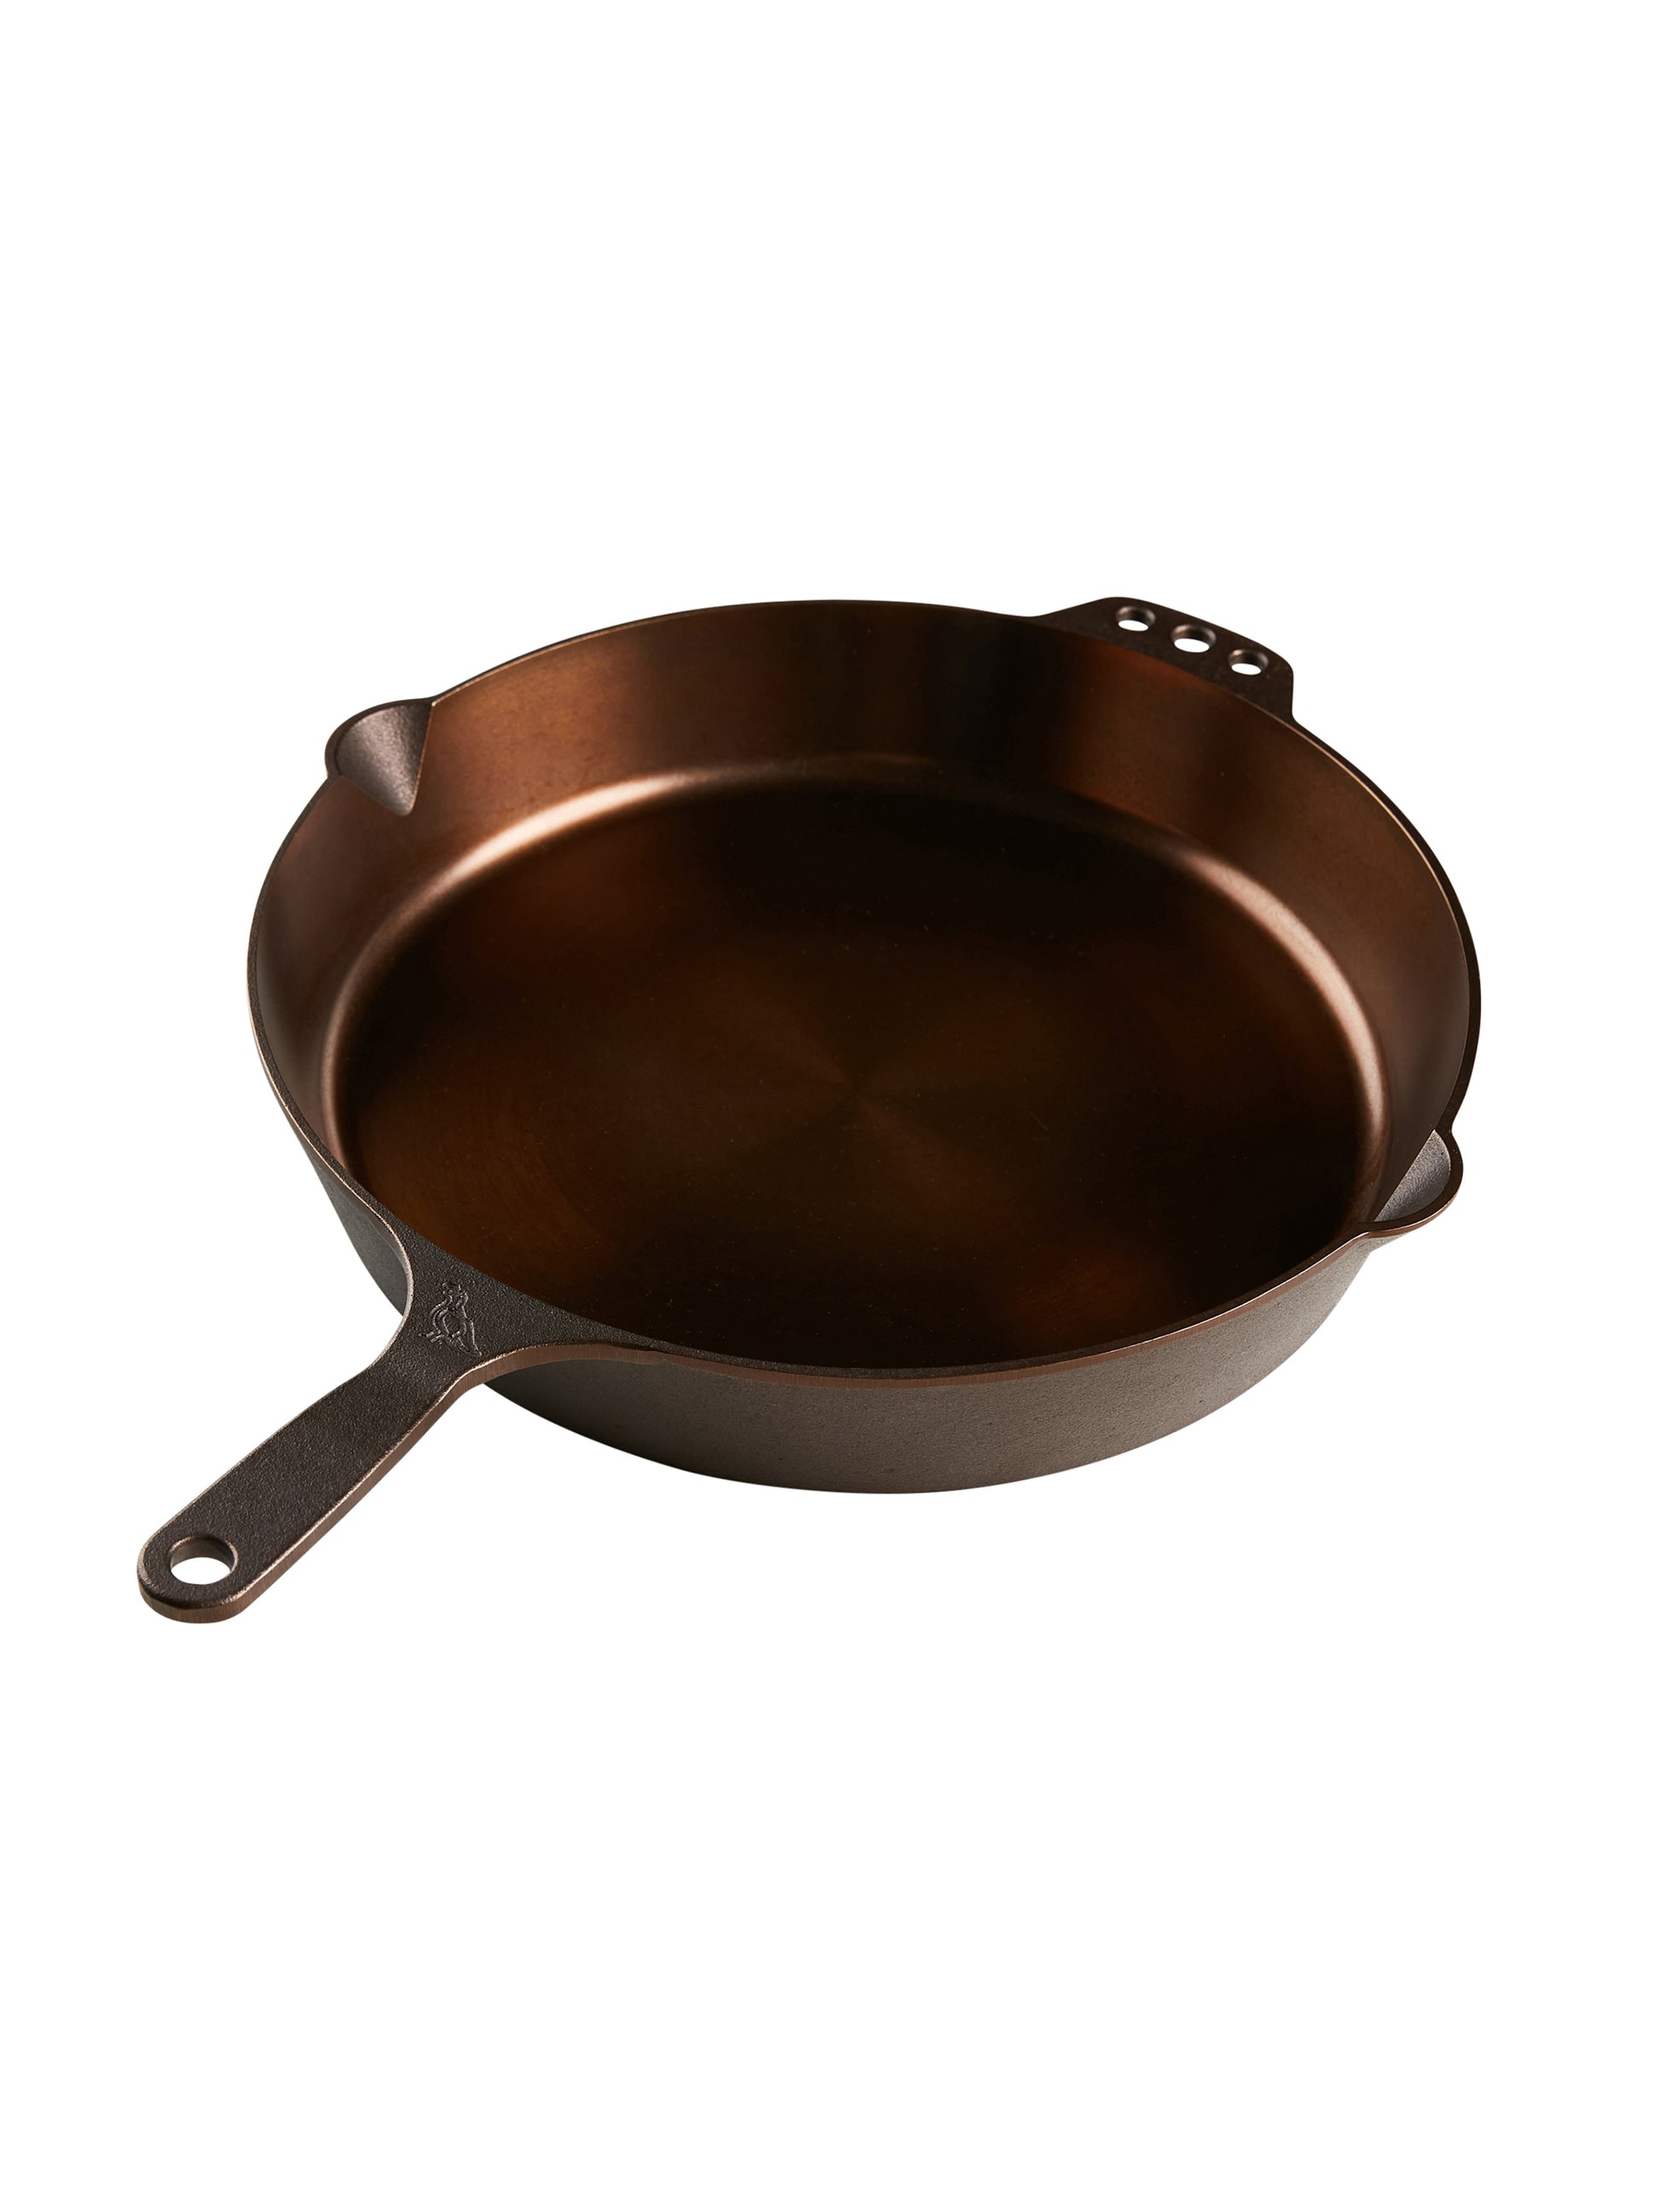 Shop the Smithey No. 14 Traditional Cast Iron Skillet at Weston Table